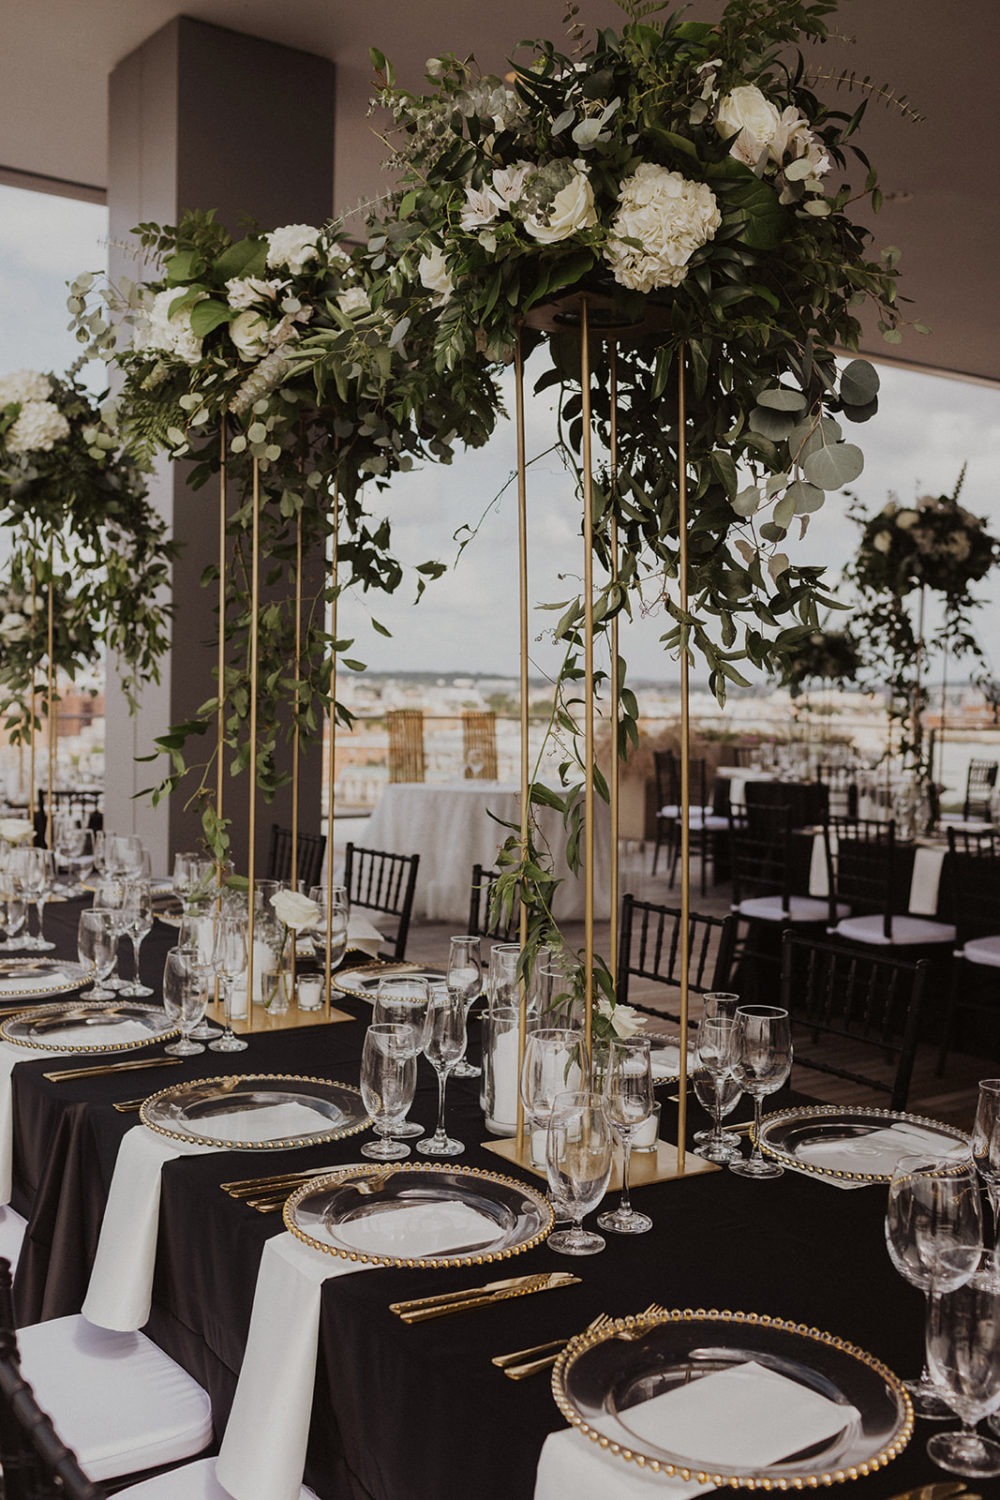 white flowers on gold decor with black tablecloth